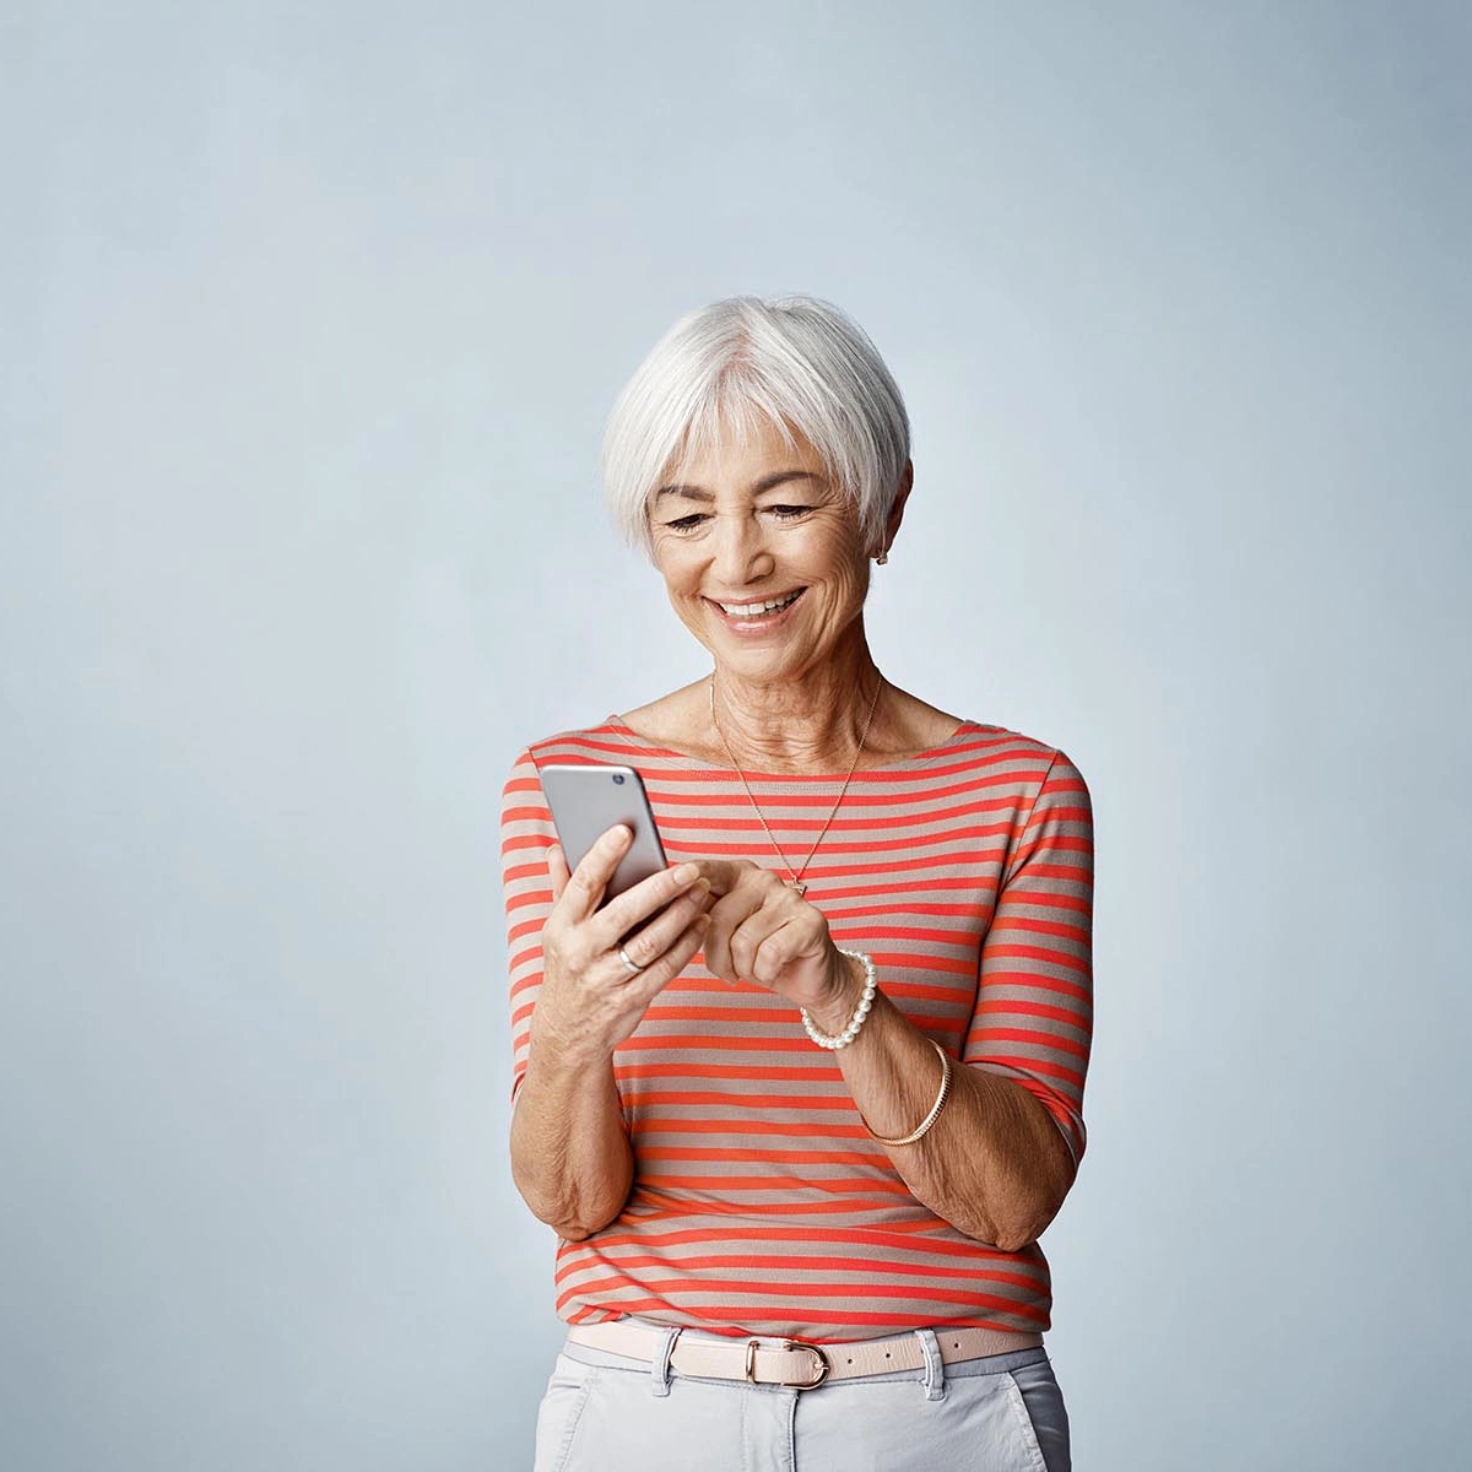 Senior citizen with a smartphone in her hand